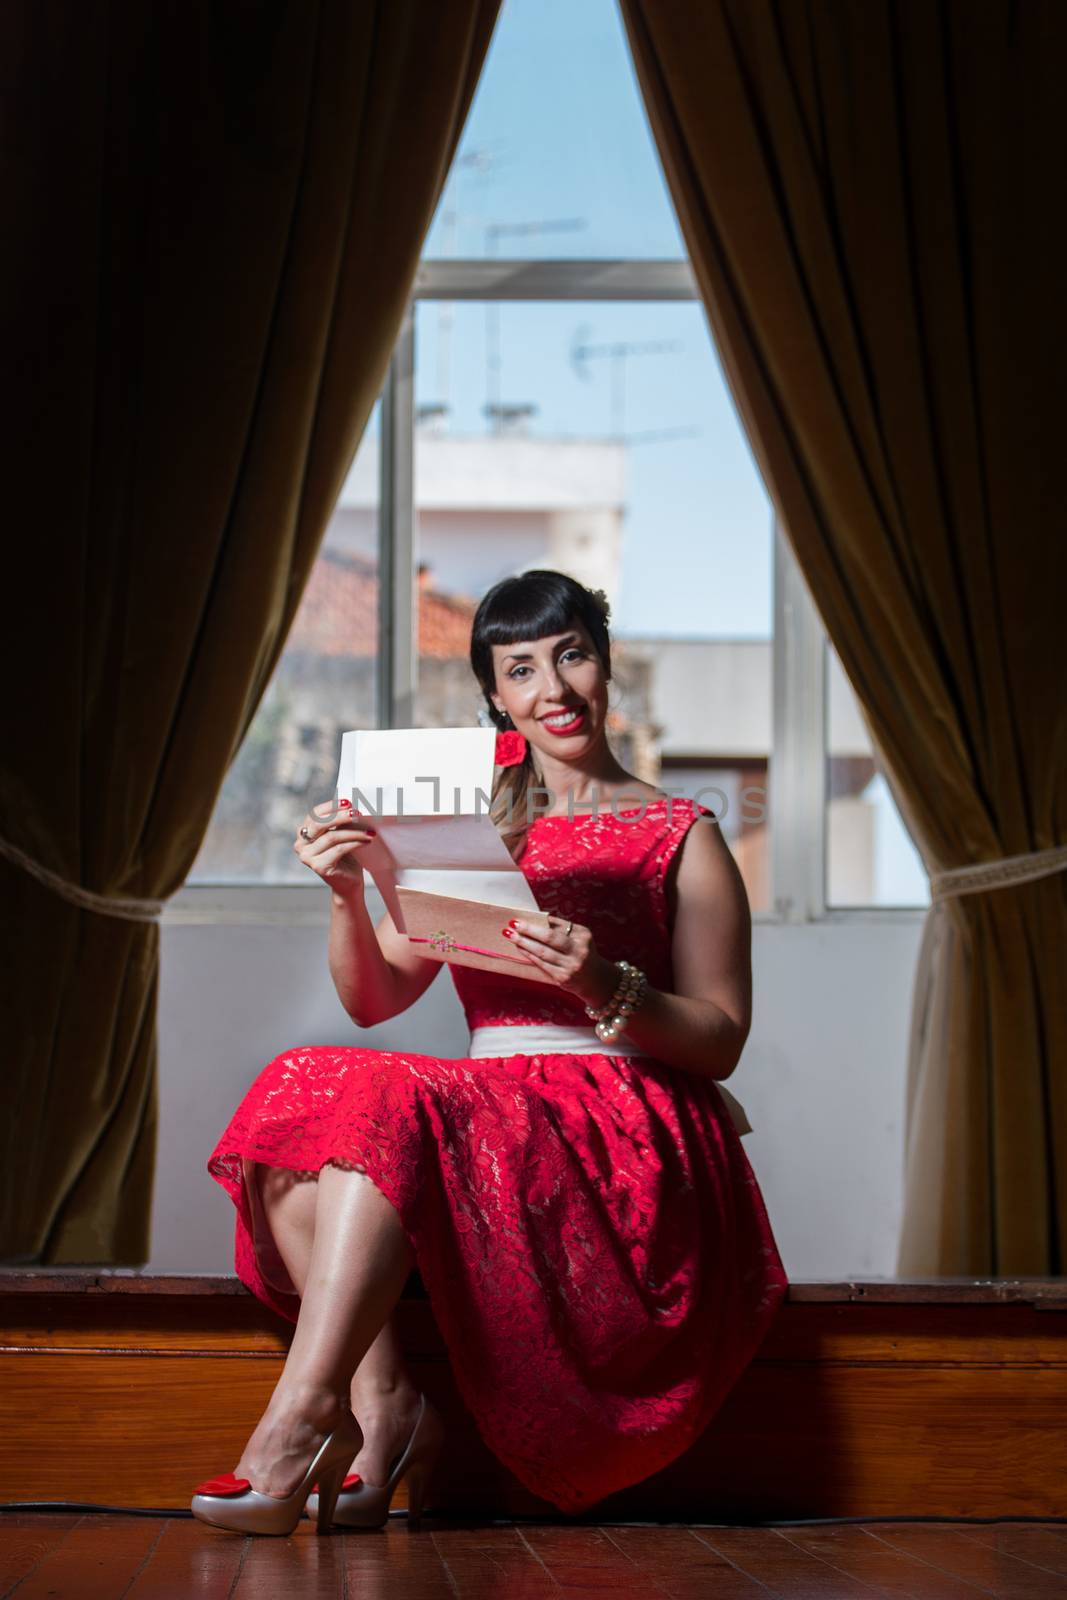 Pinup girl with red dress reading a romantic letter.